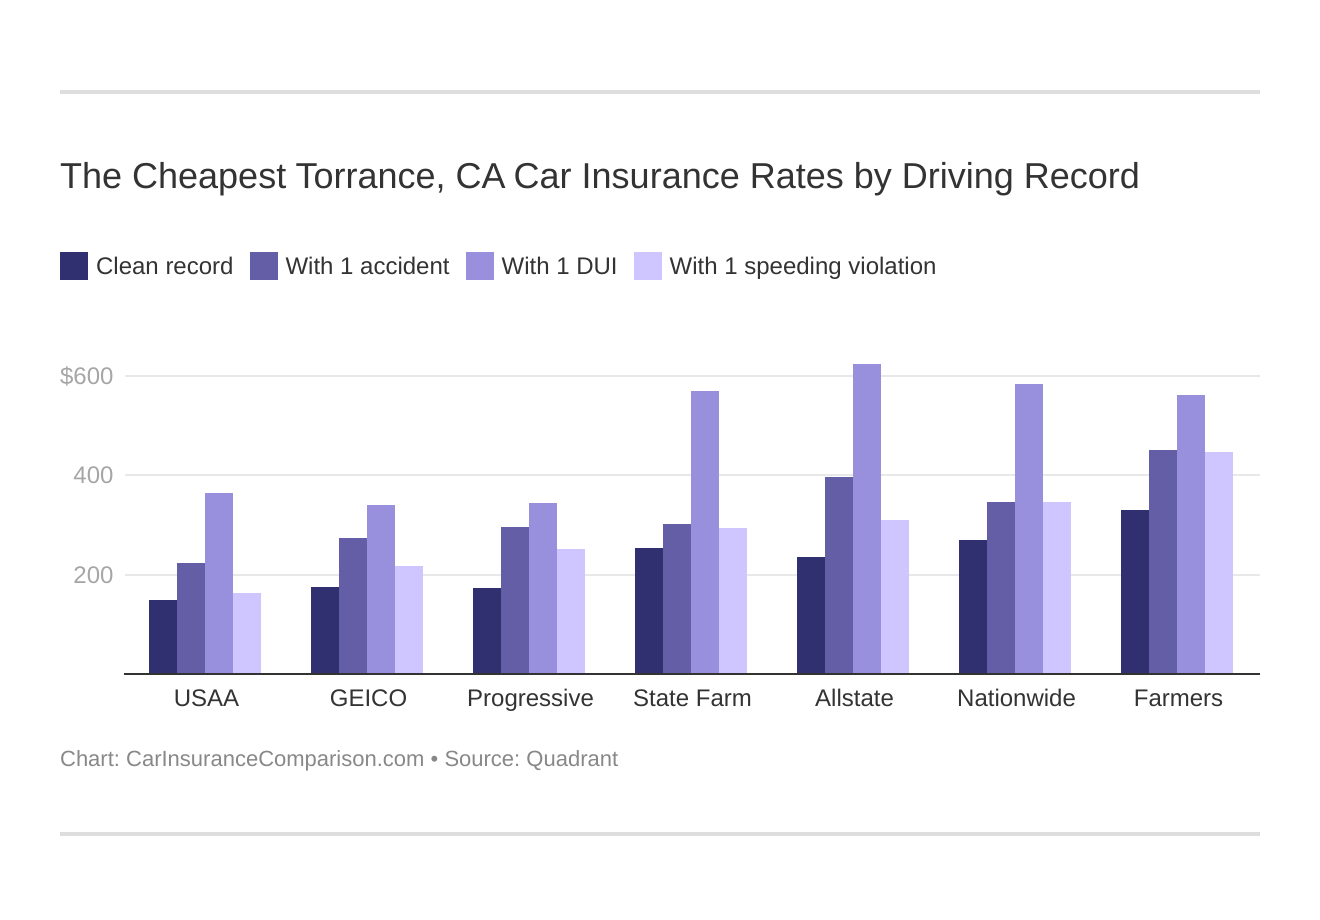 The Cheapest Torrance, CA Car Insurance Rates by Driving Record